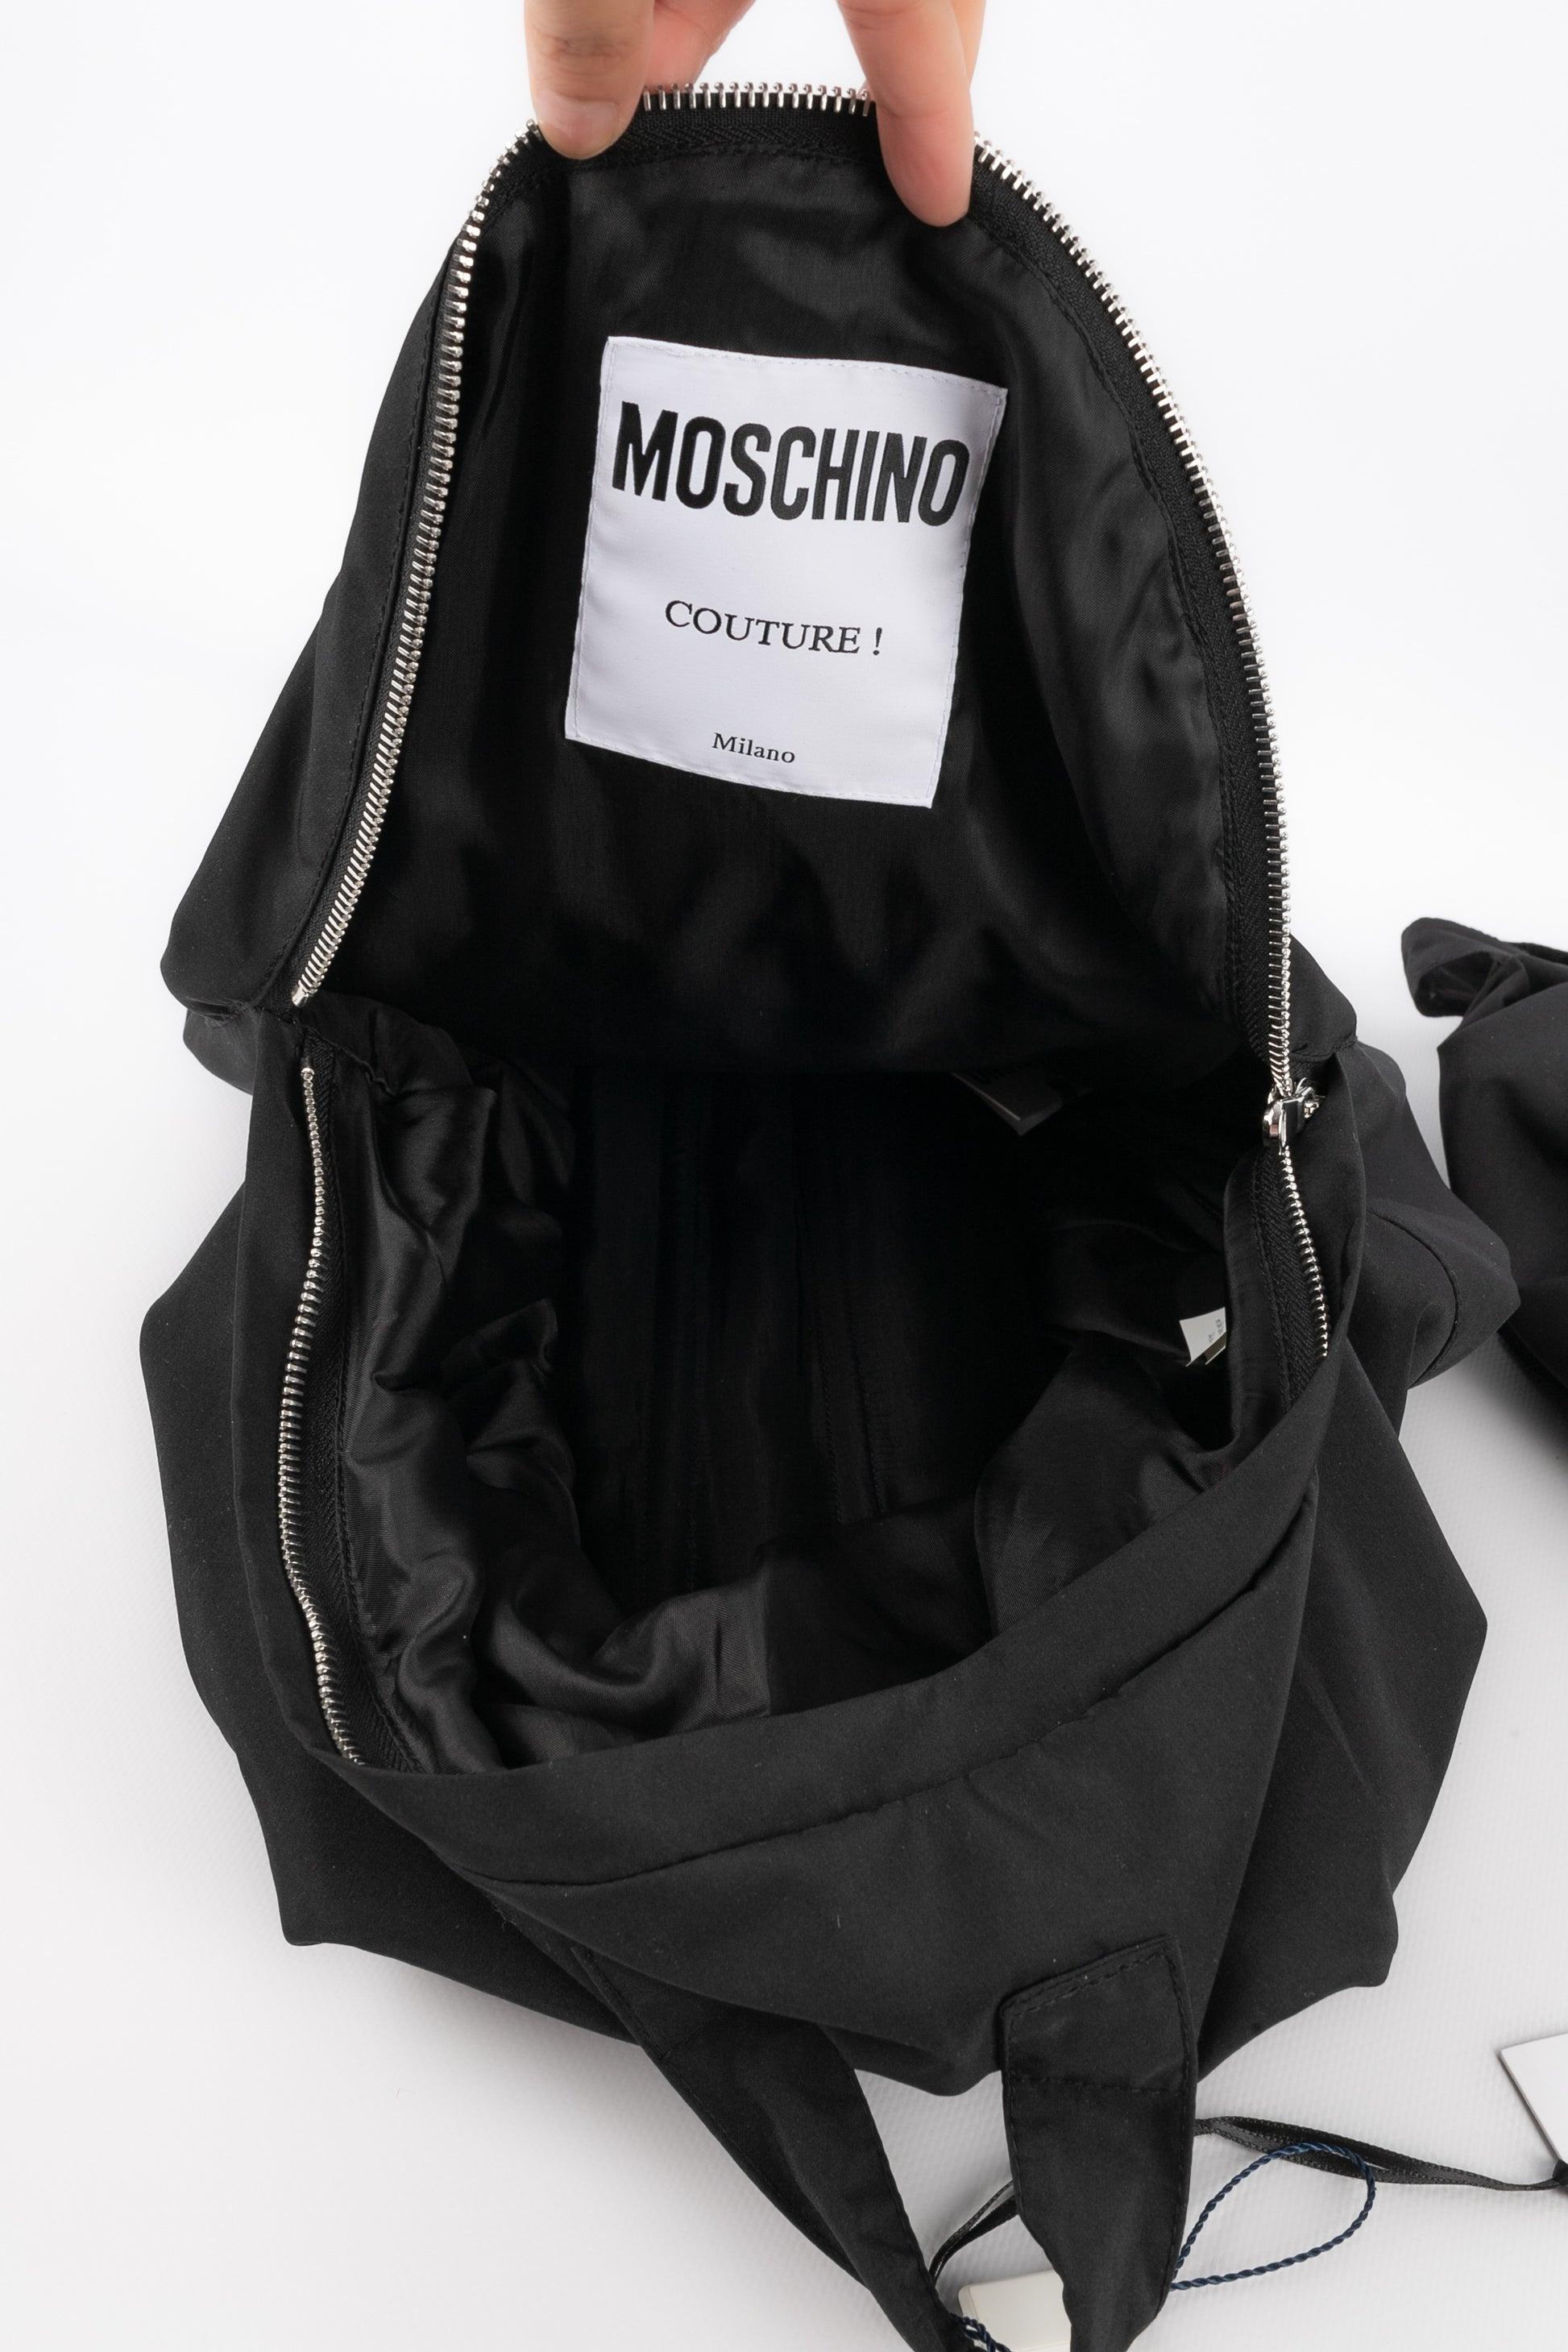 Moschino Long Black Canvas Glove Bag For Sale 3